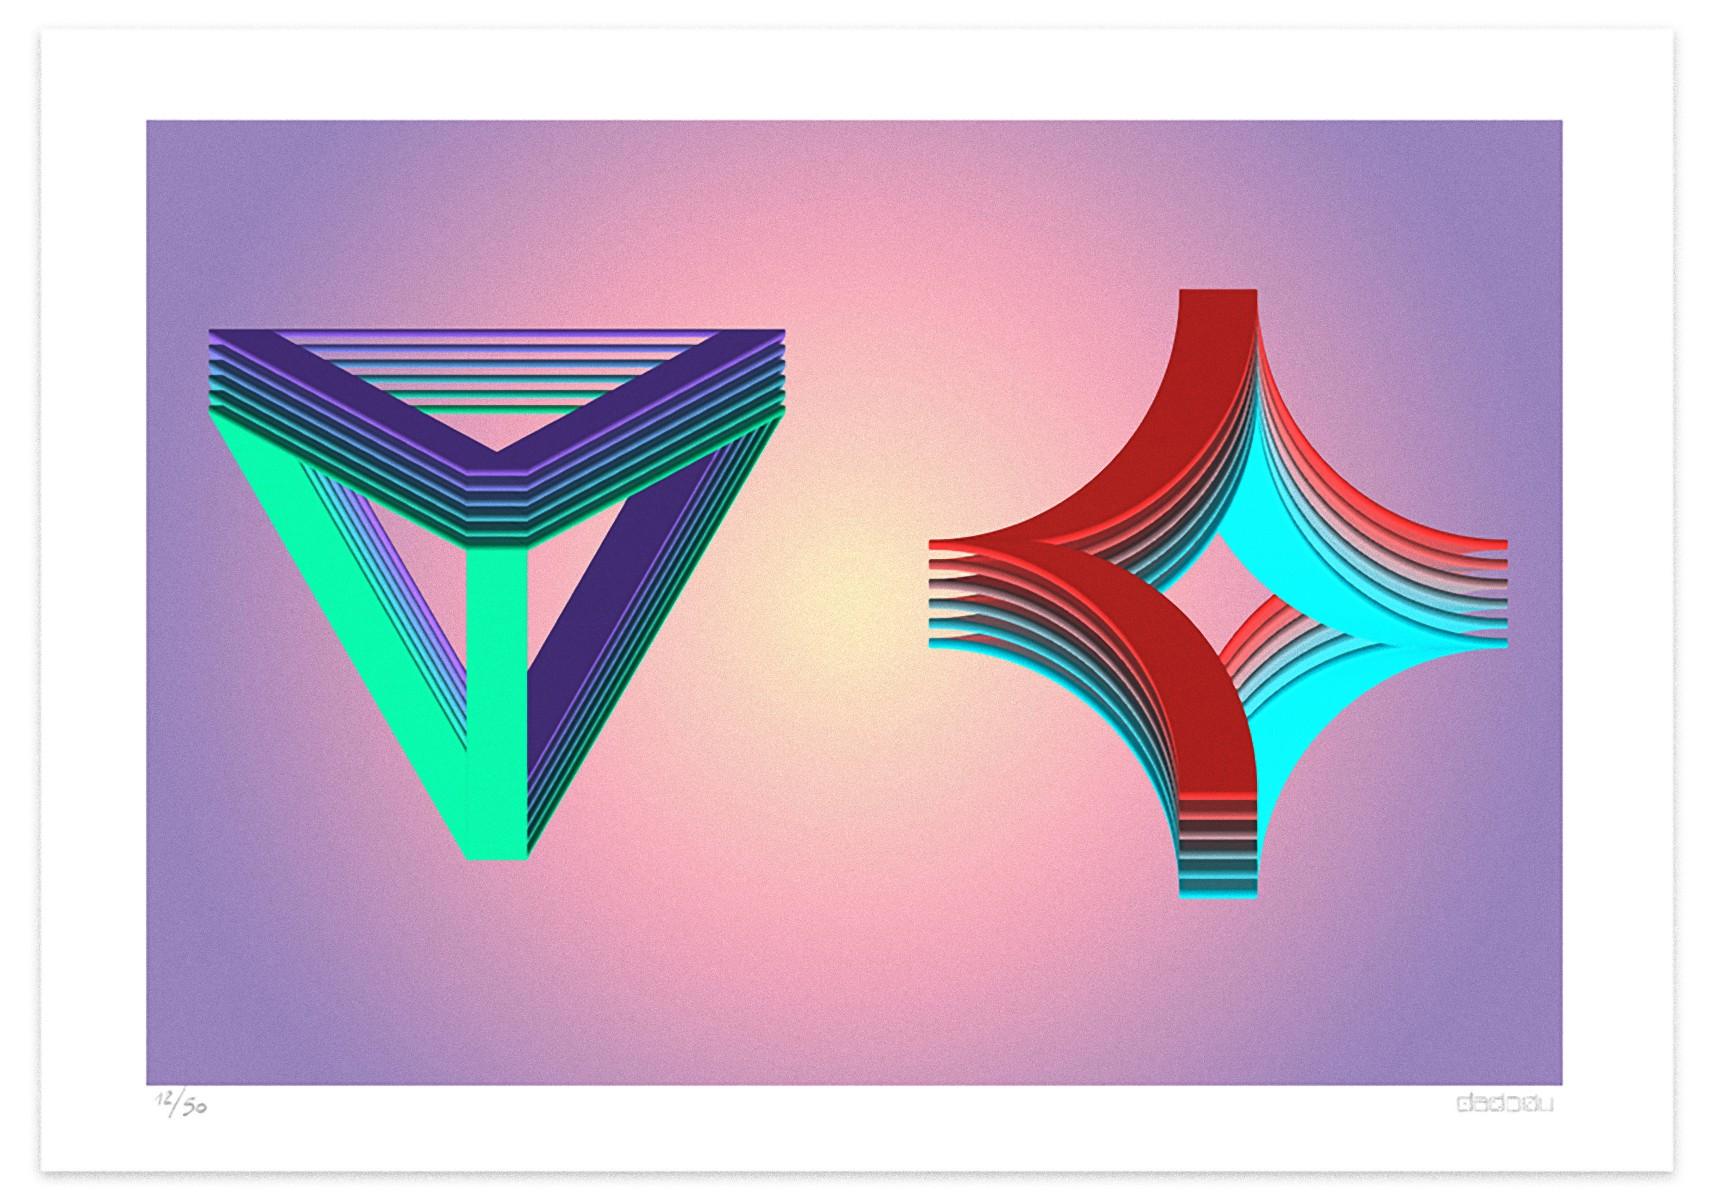 Trapezoid  is an outstanding  giclée print realized by the contemporary artist  Dadodu in 2019.

This original artwork shows an abstract composition with three-dimensional shapes.

Hand-signed on the lower right corner "Dadodu" and numbered on the